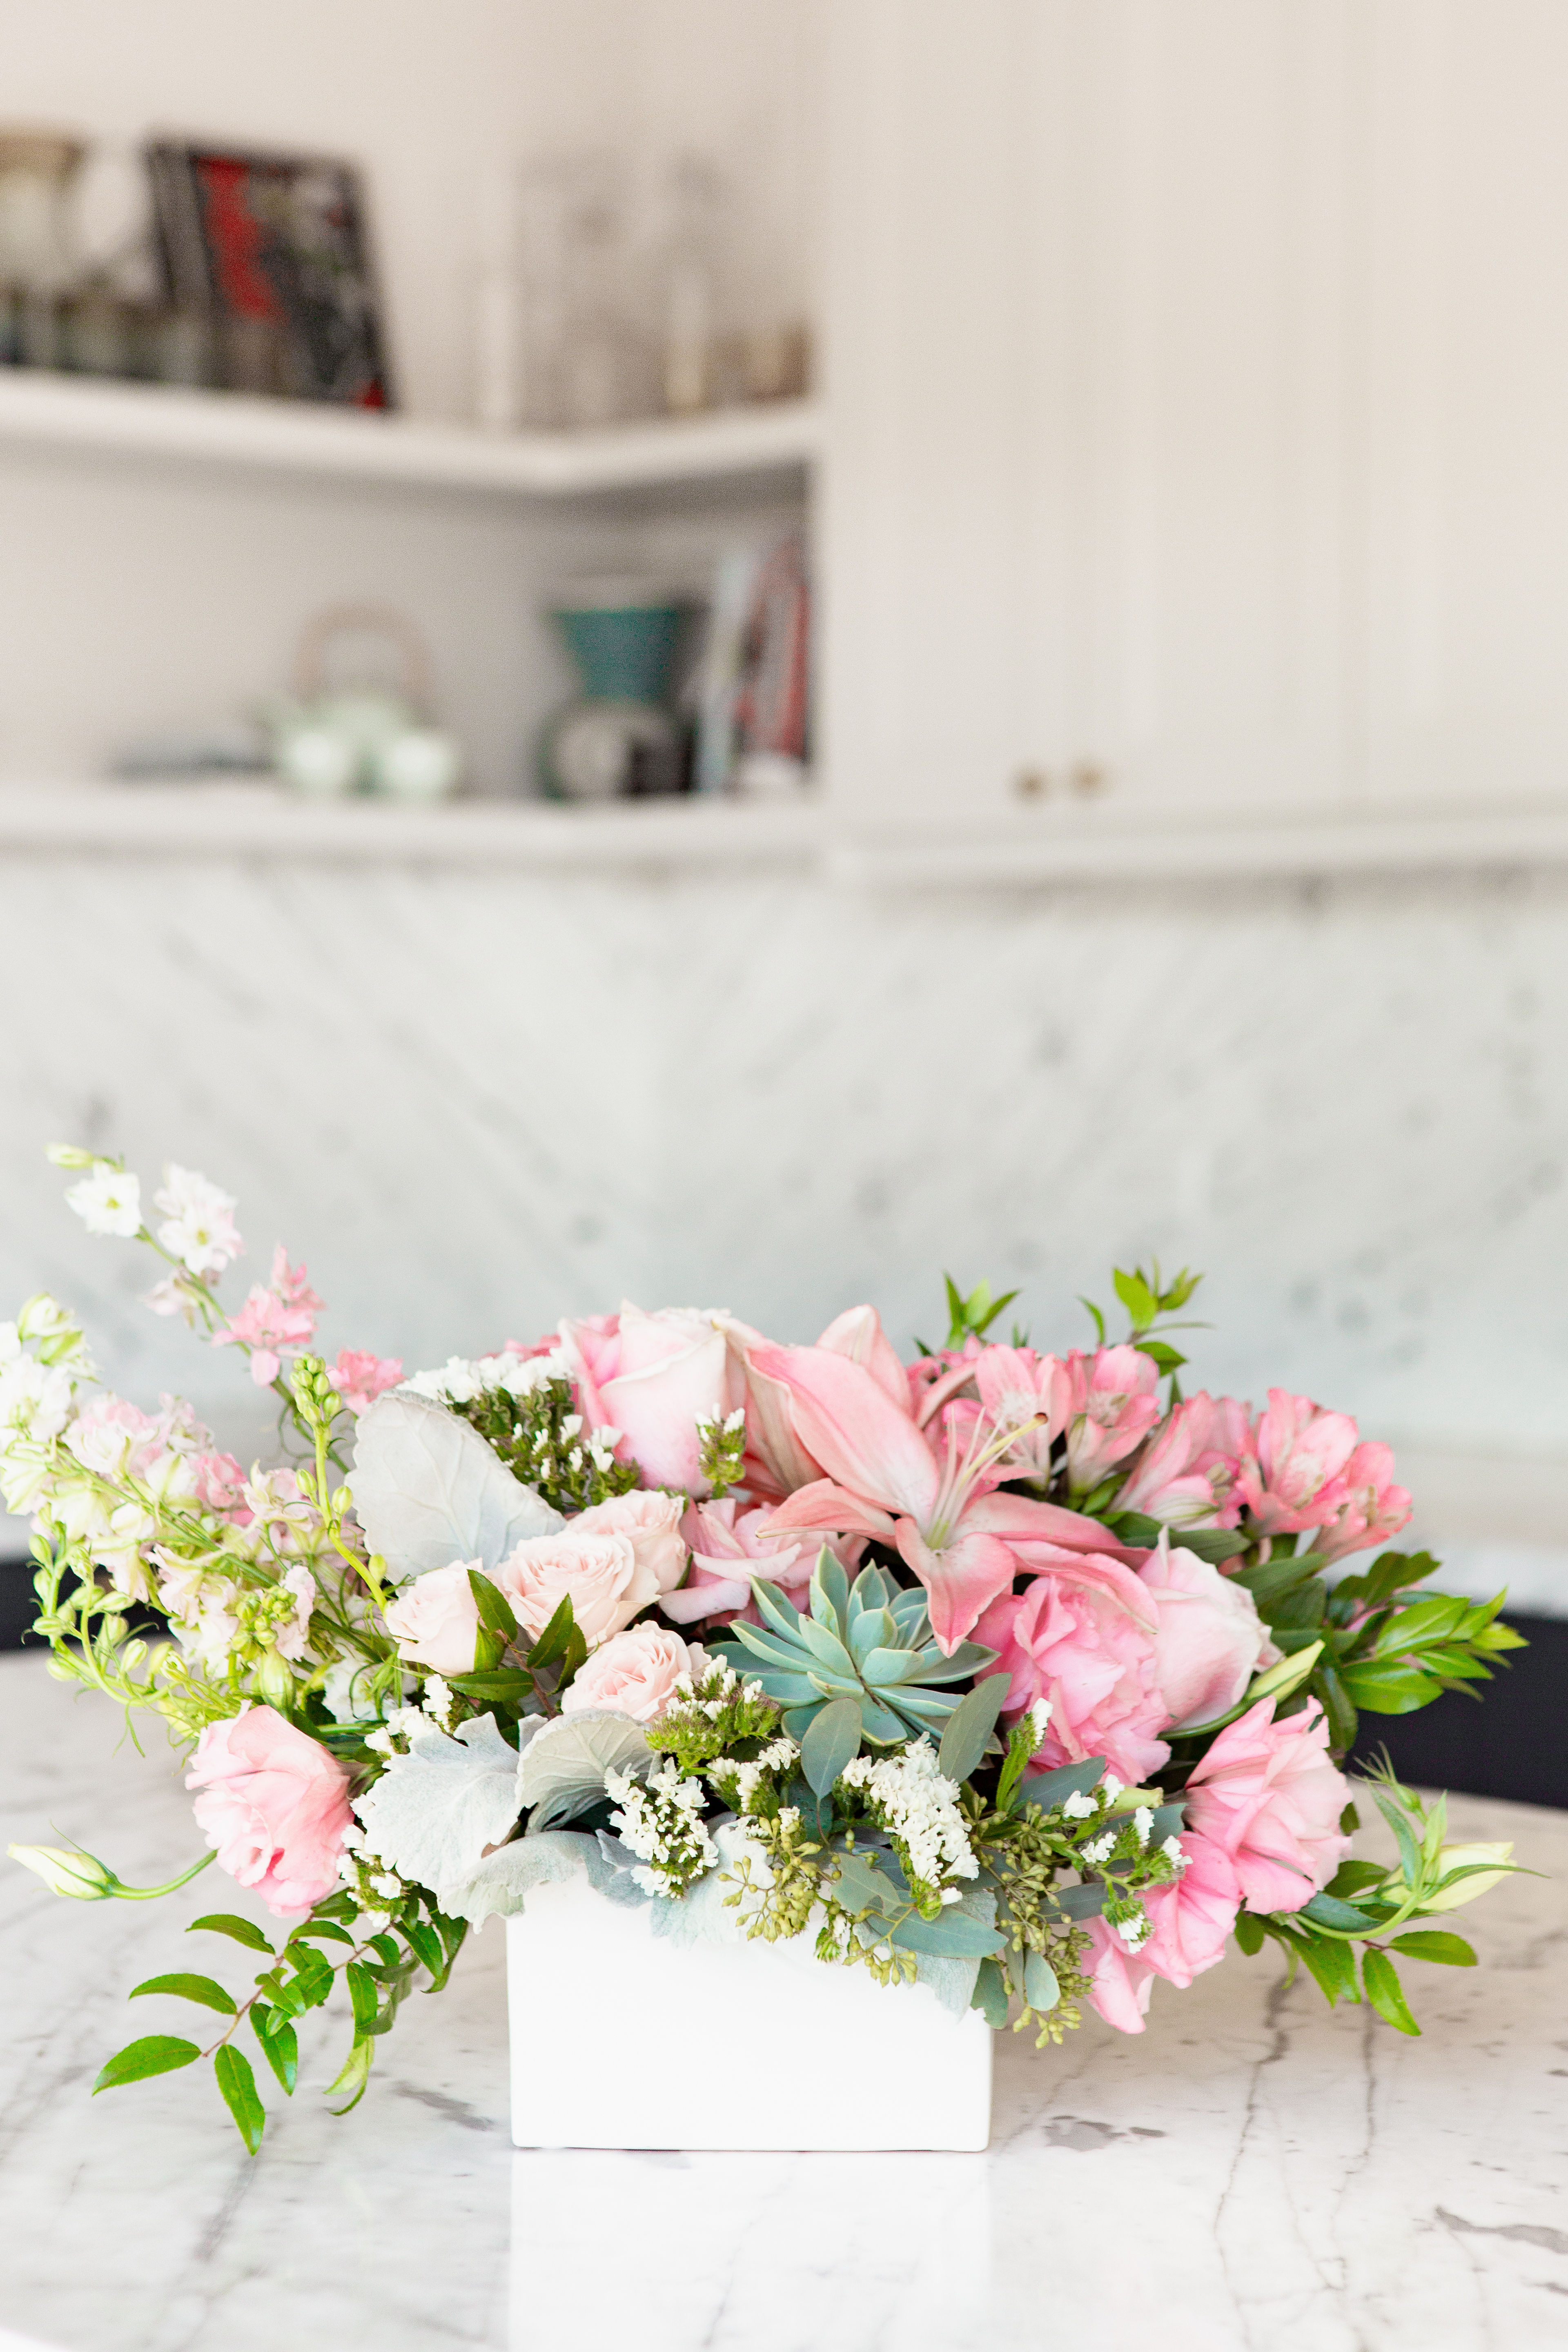 Pink roses, succulents, greenery and more in a white container on a kitchen counter